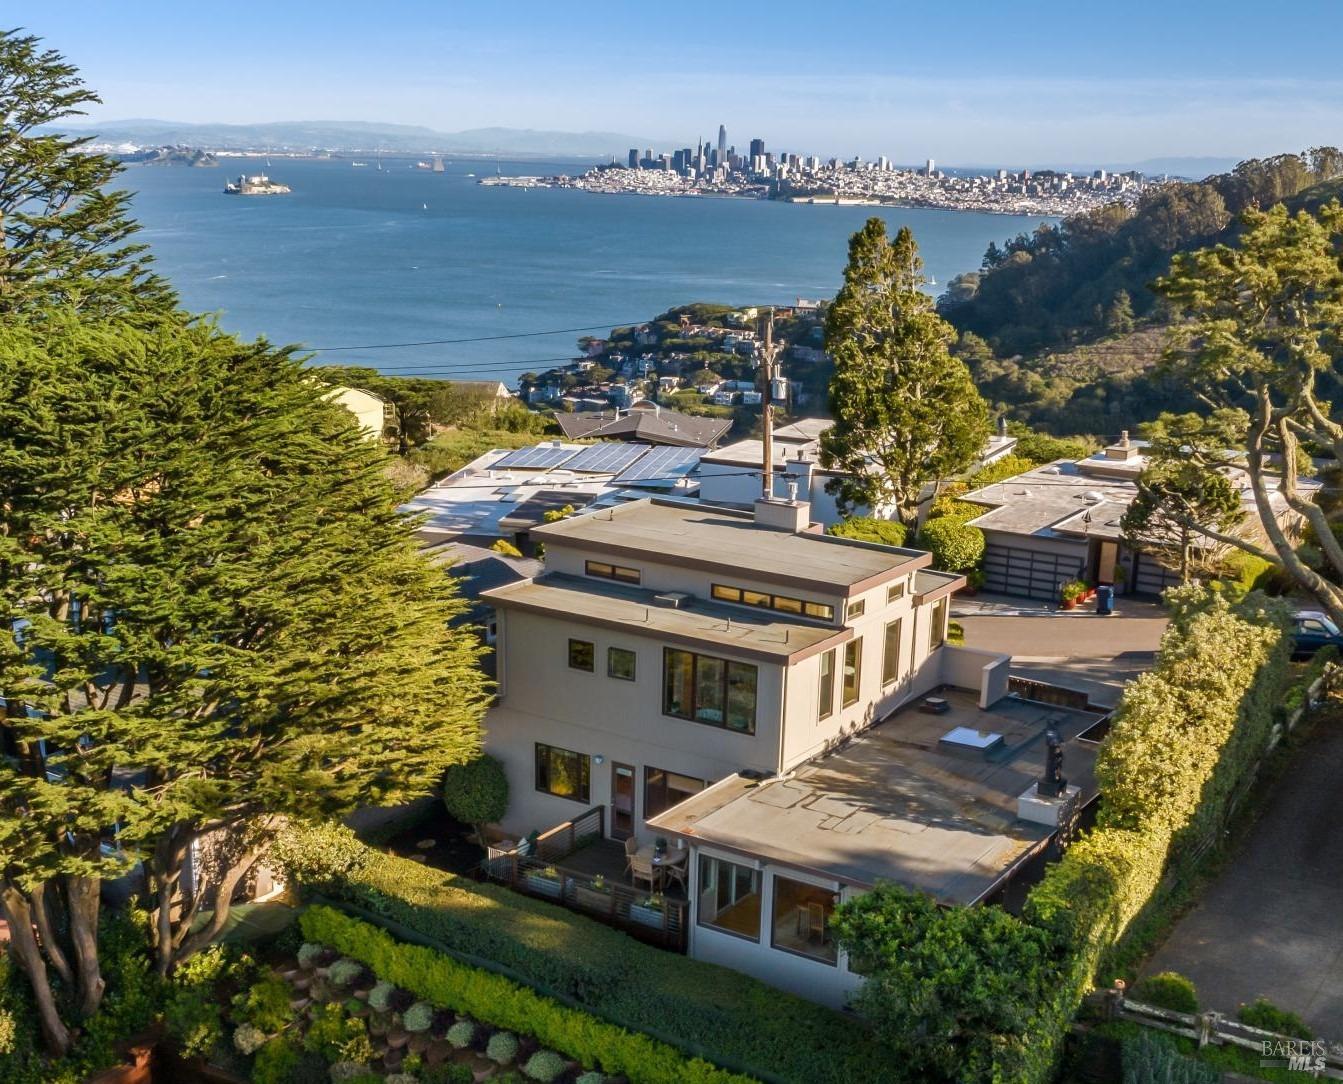 Photo of 110 Cloud View Rd in Sausalito, CA